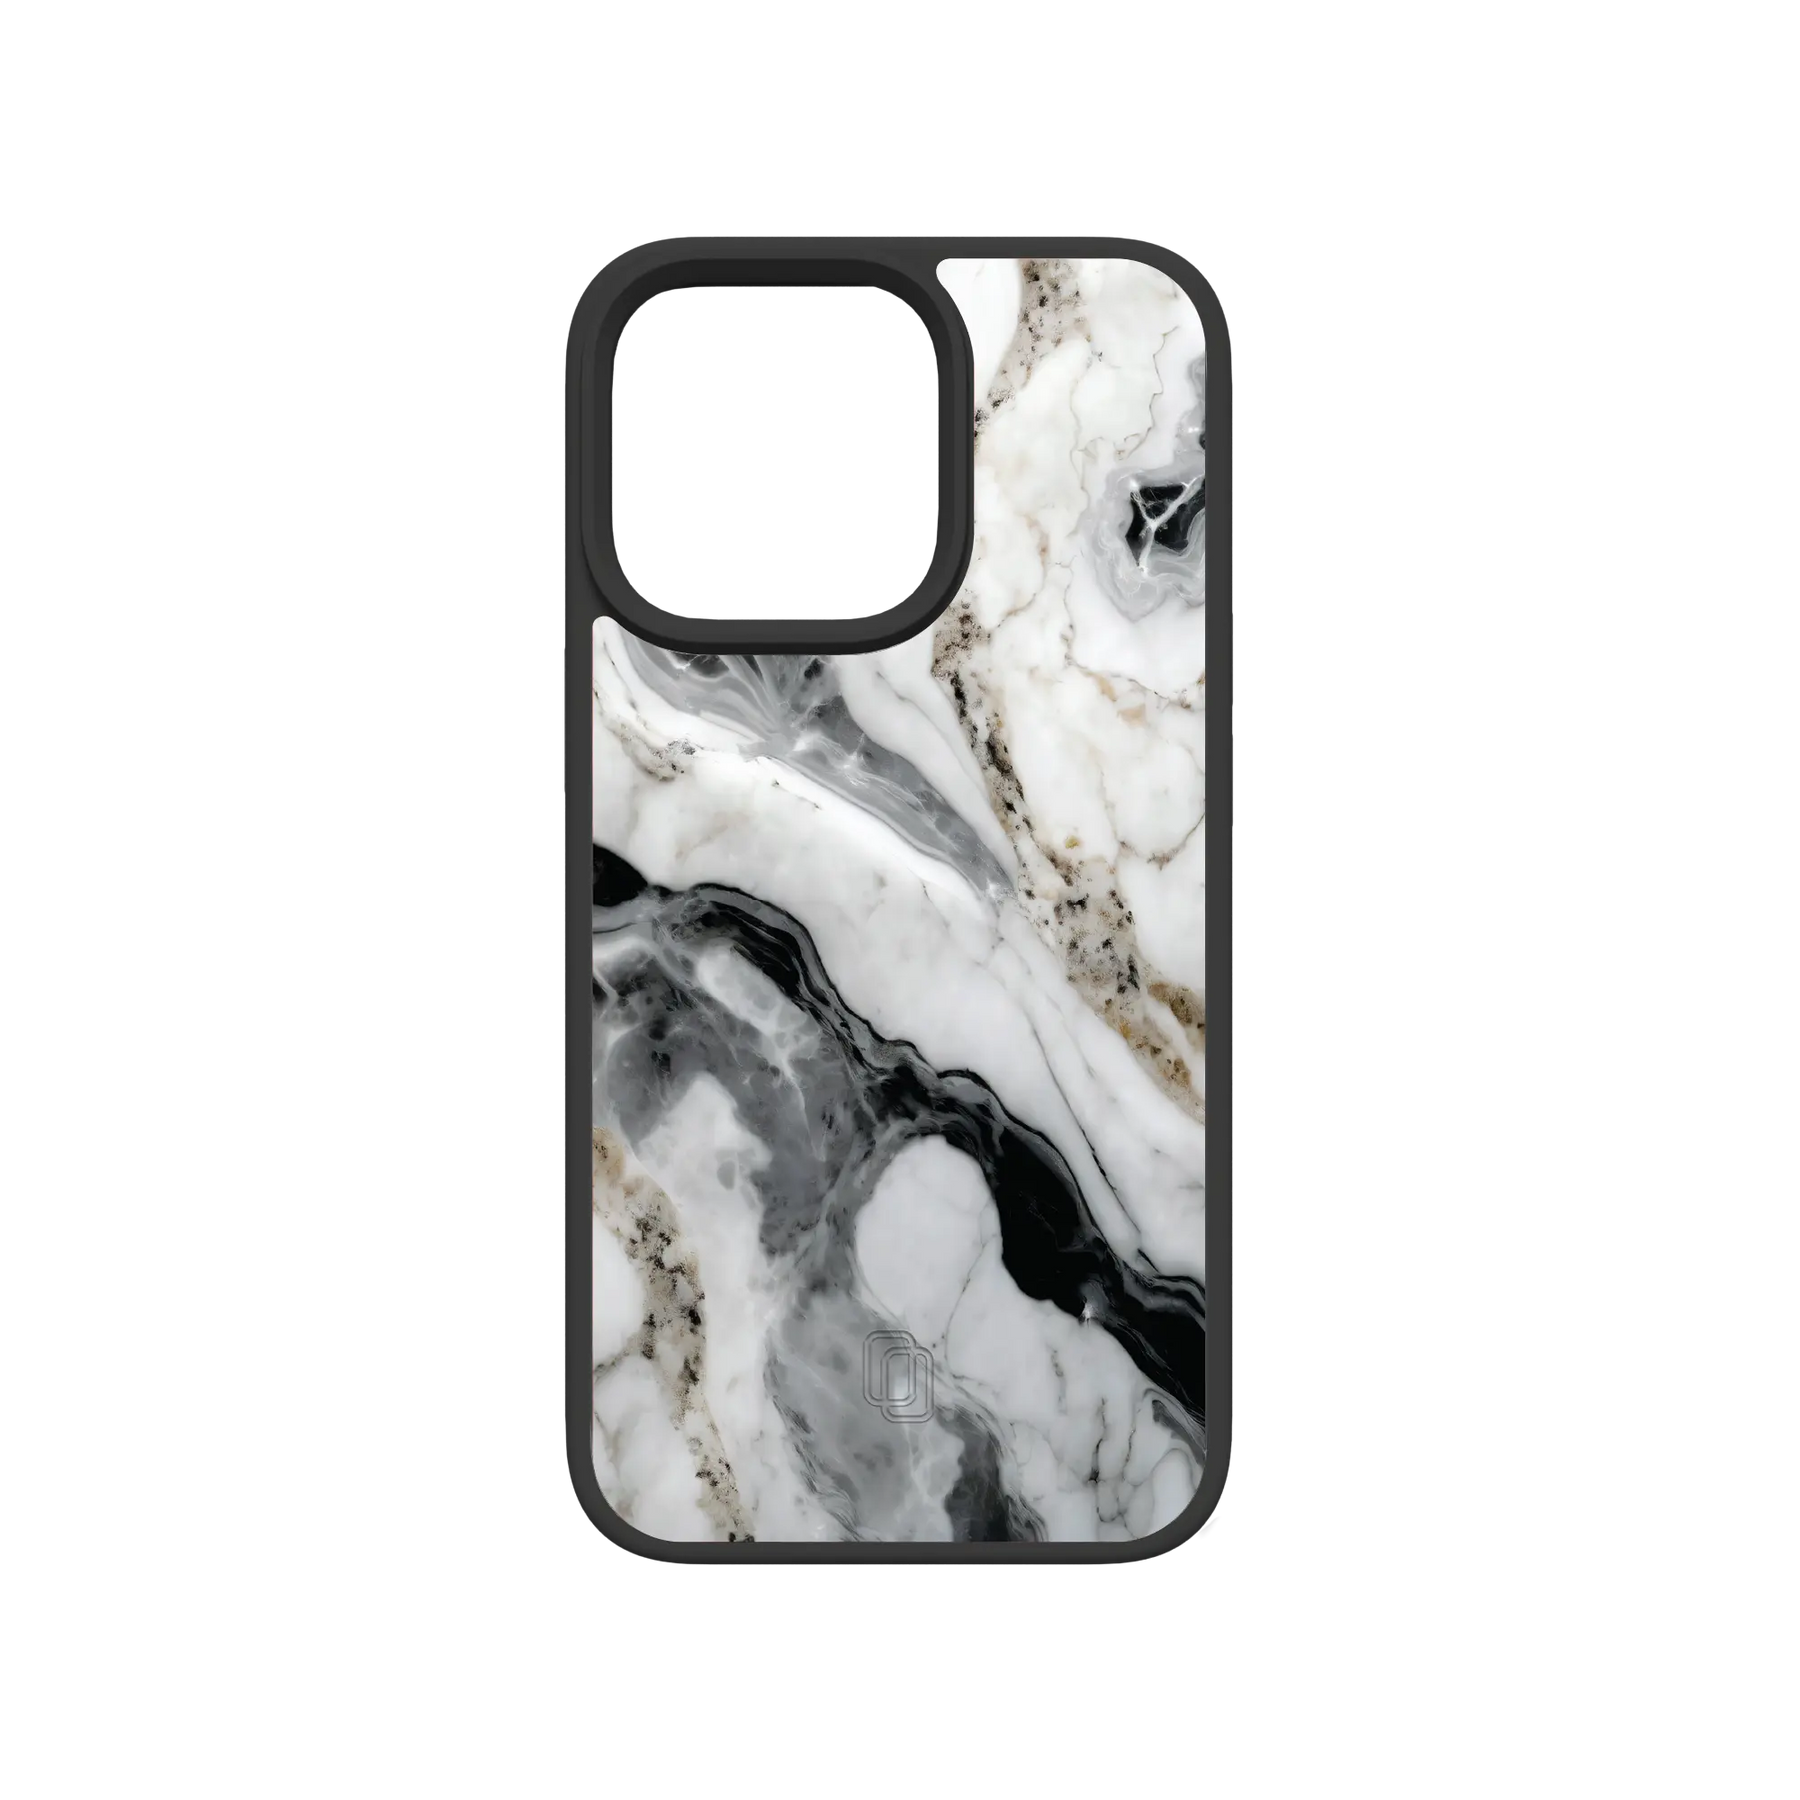 Apple-iPhone-13-Pro-Crystal-Clear Pure Snow | Protective MagSafe White Marble Case | Marble Stone Series for Apple iPhone 13 Series cellhelmet cellhelmet